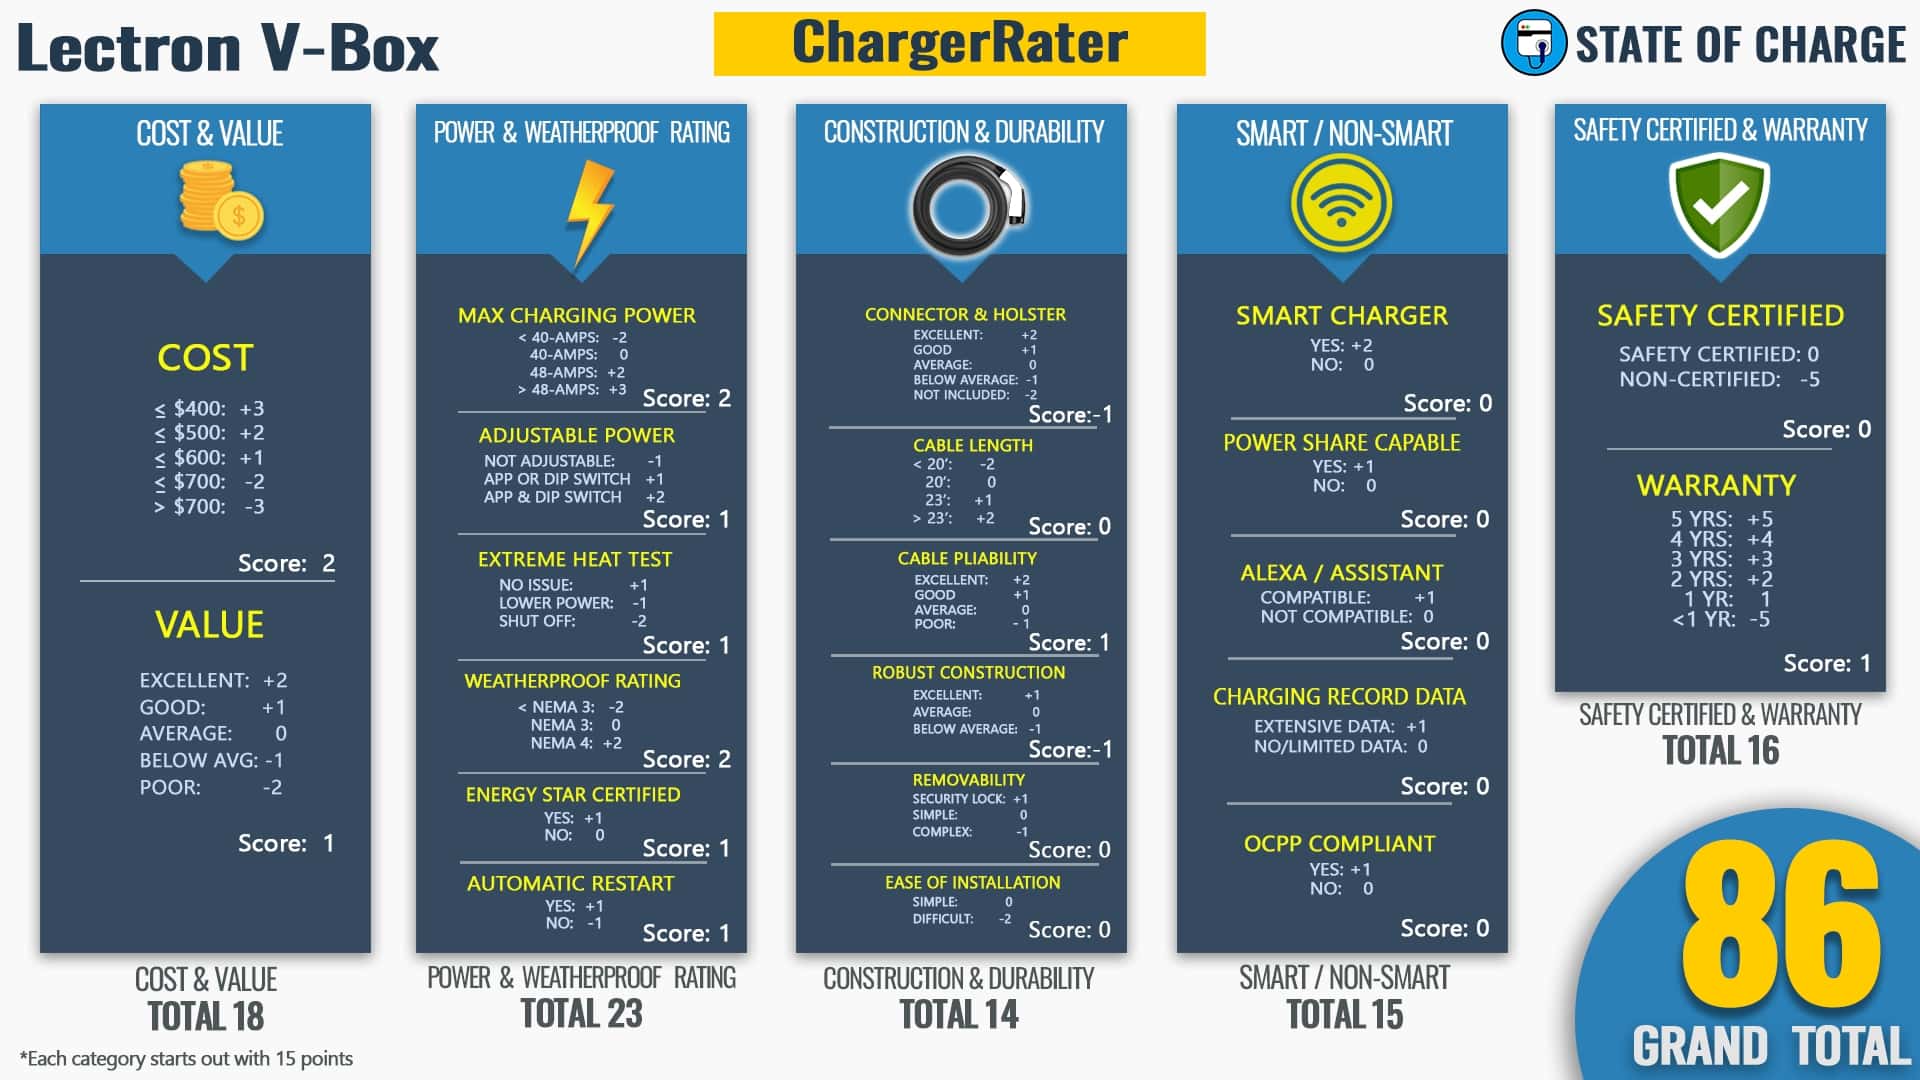 should you buy the lectron v-box 48-amp ev charger?